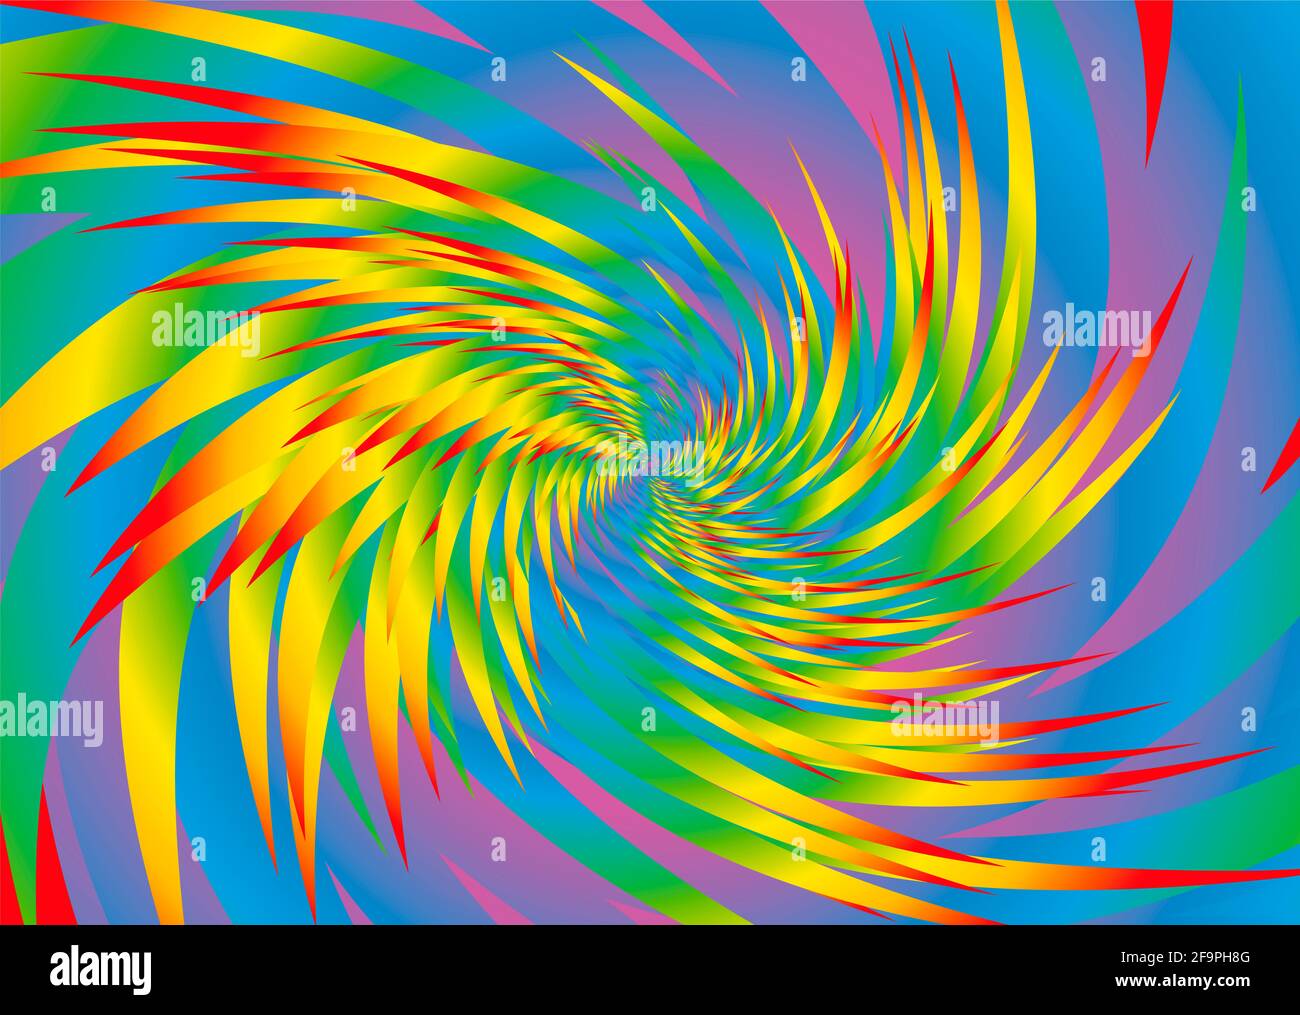 Rainbow spectrum colored spiral pattern, wild psychedelic powerful swirling feathers, colorful spiny background. Stock Photo